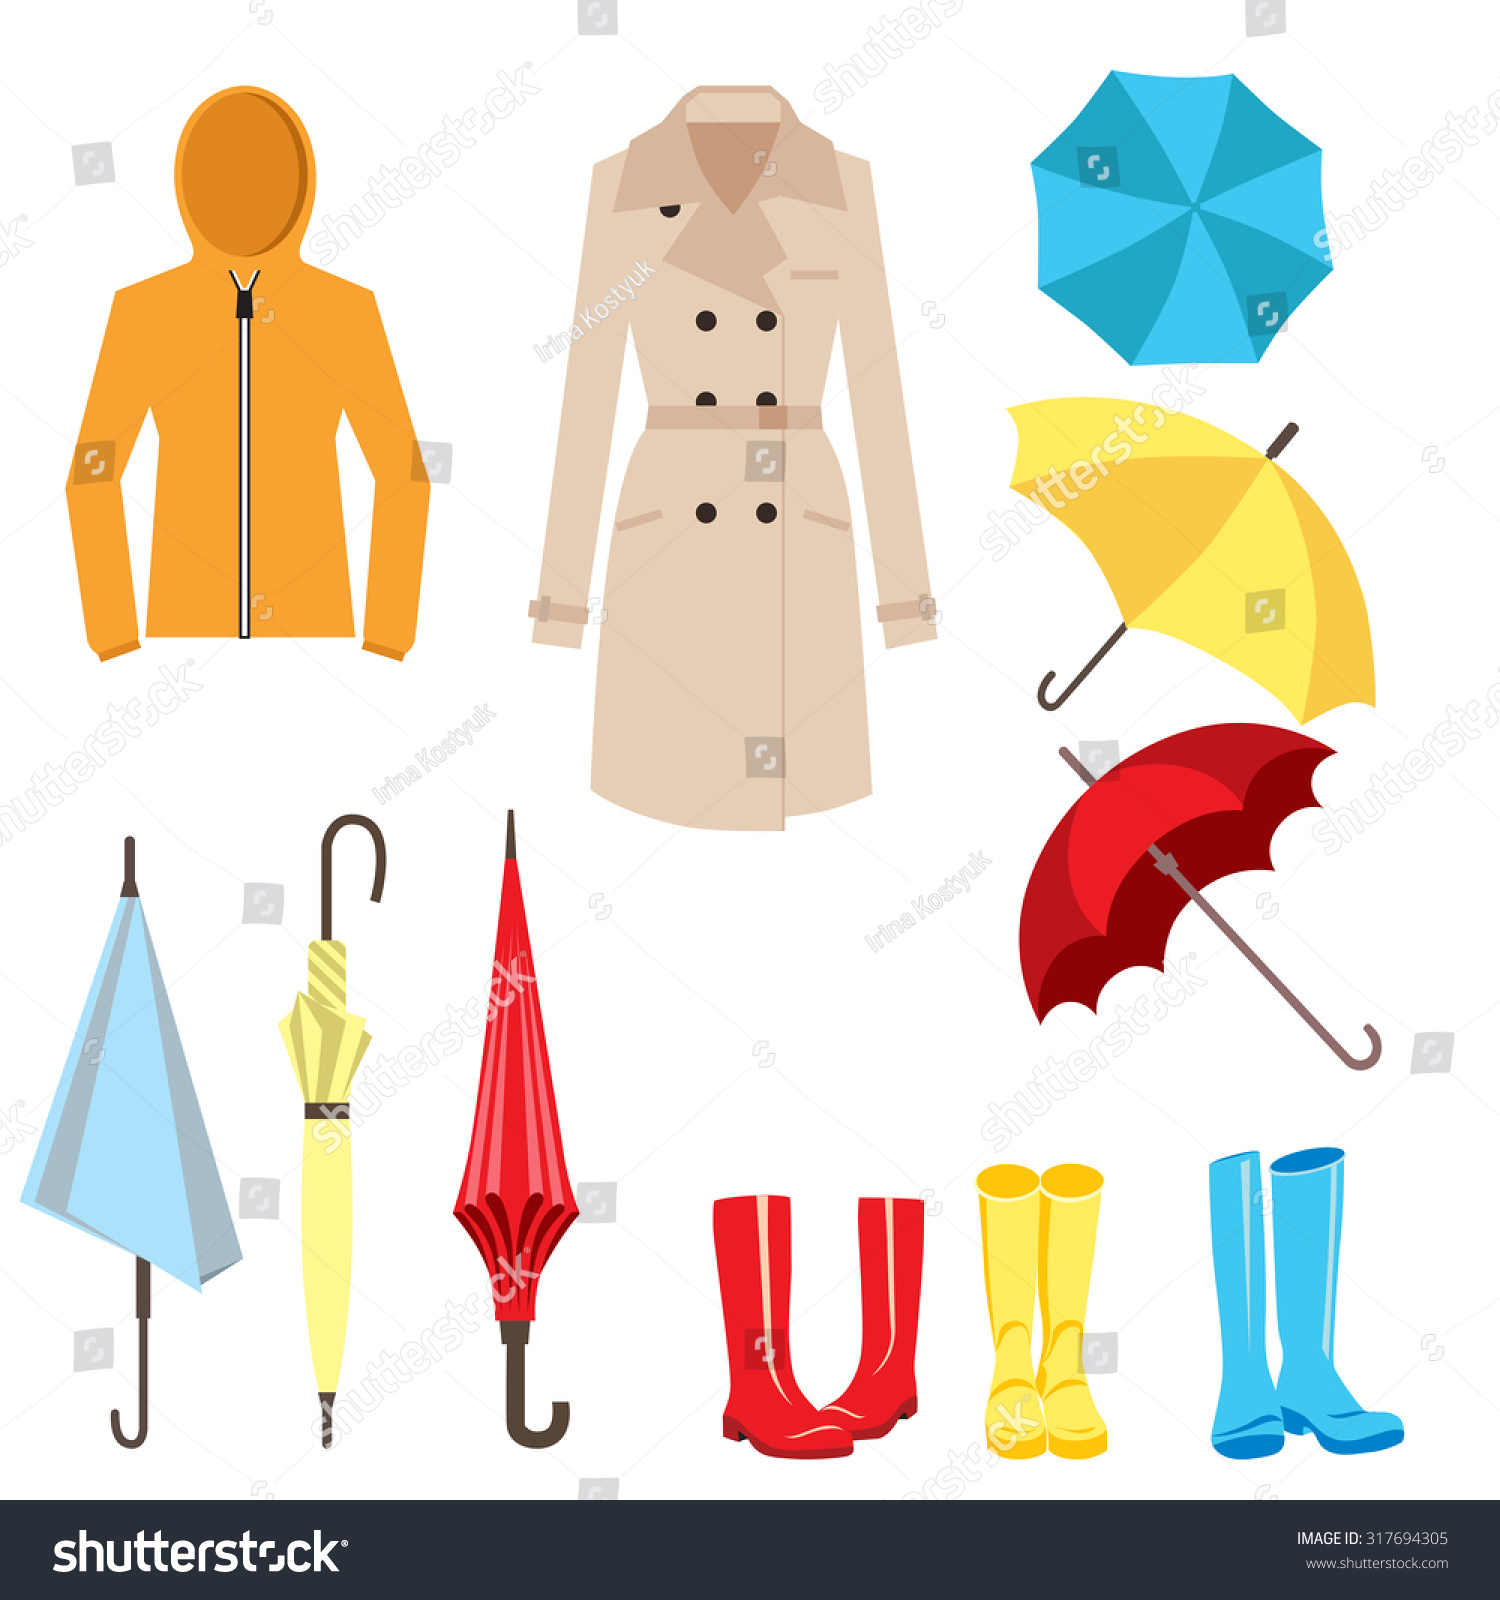 clothes worksheet clipart - photo #24